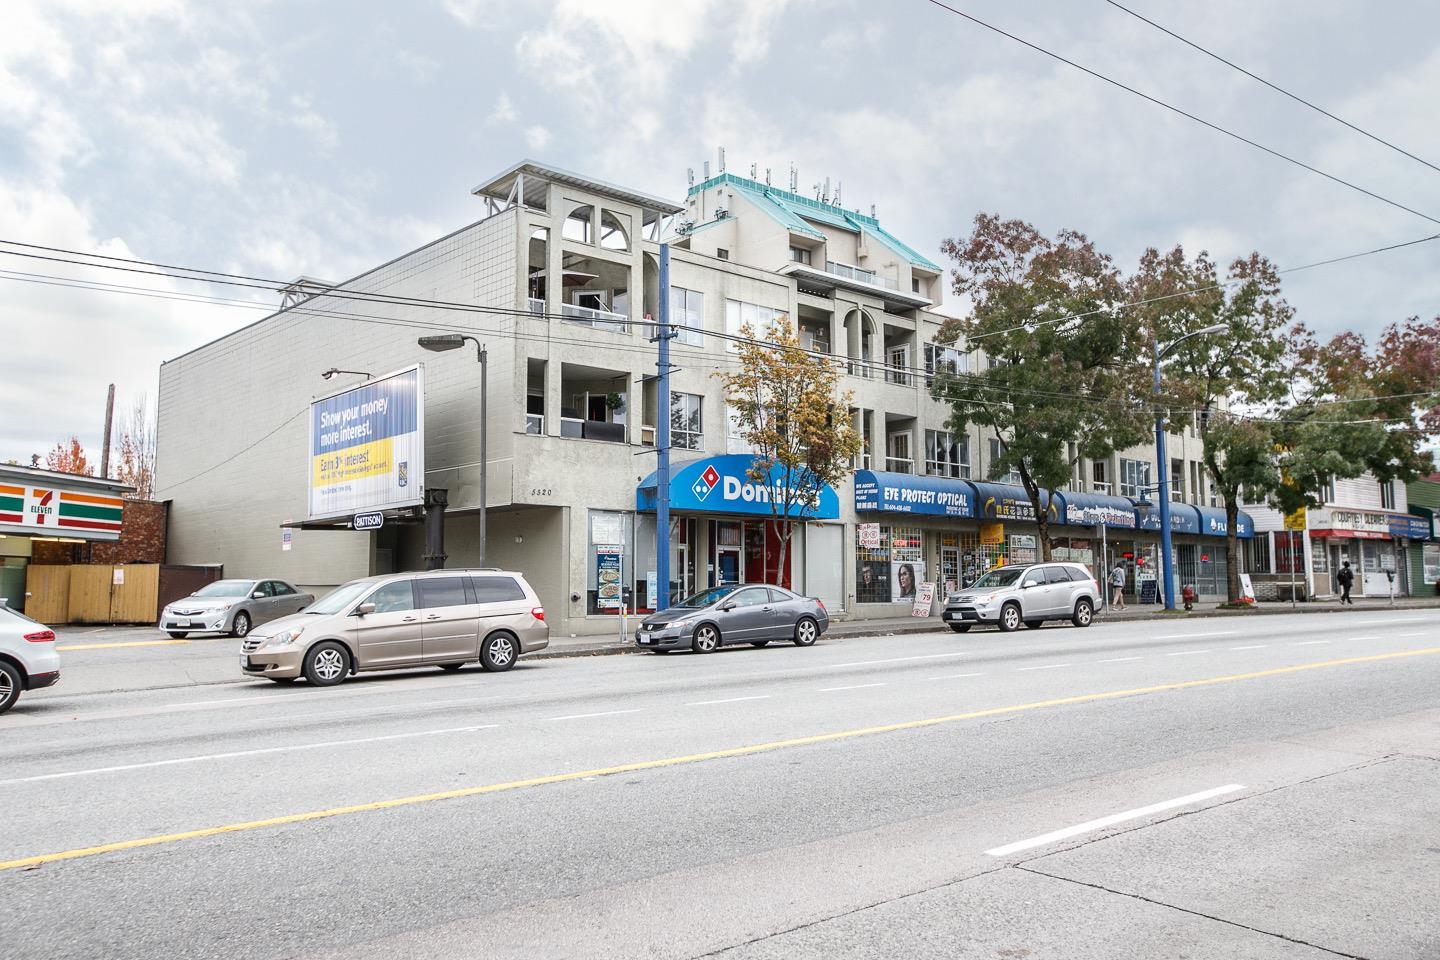 311-5520 JOYCE STREET, Vancouver, British Columbia, 1 Bedroom Bedrooms, ,1 BathroomBathrooms,Residential Attached,For Sale,R2792912